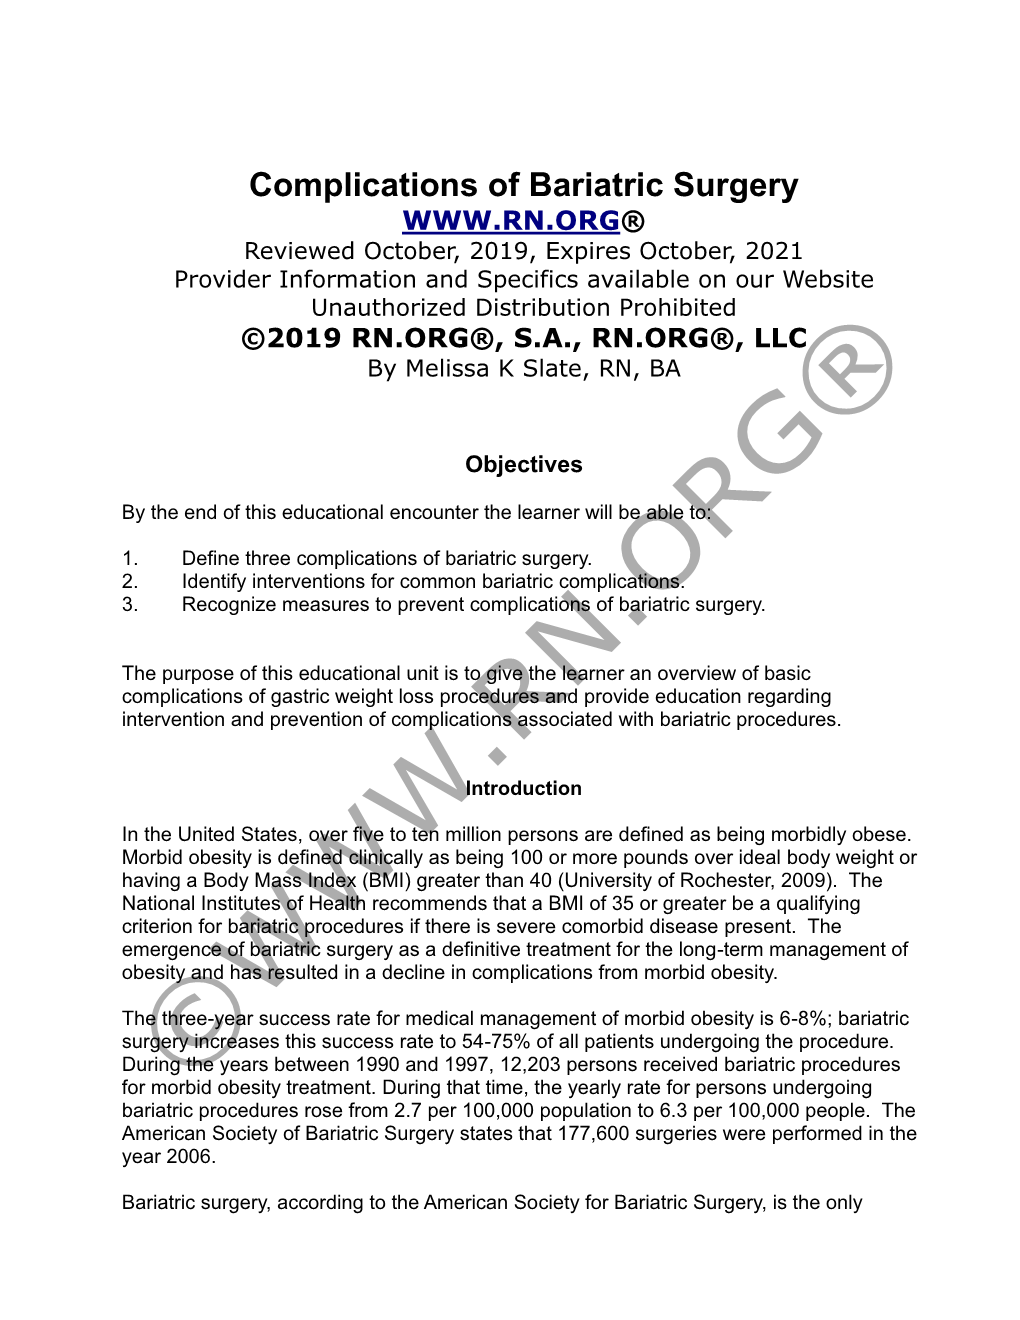 Complications of Bariatric Surgery